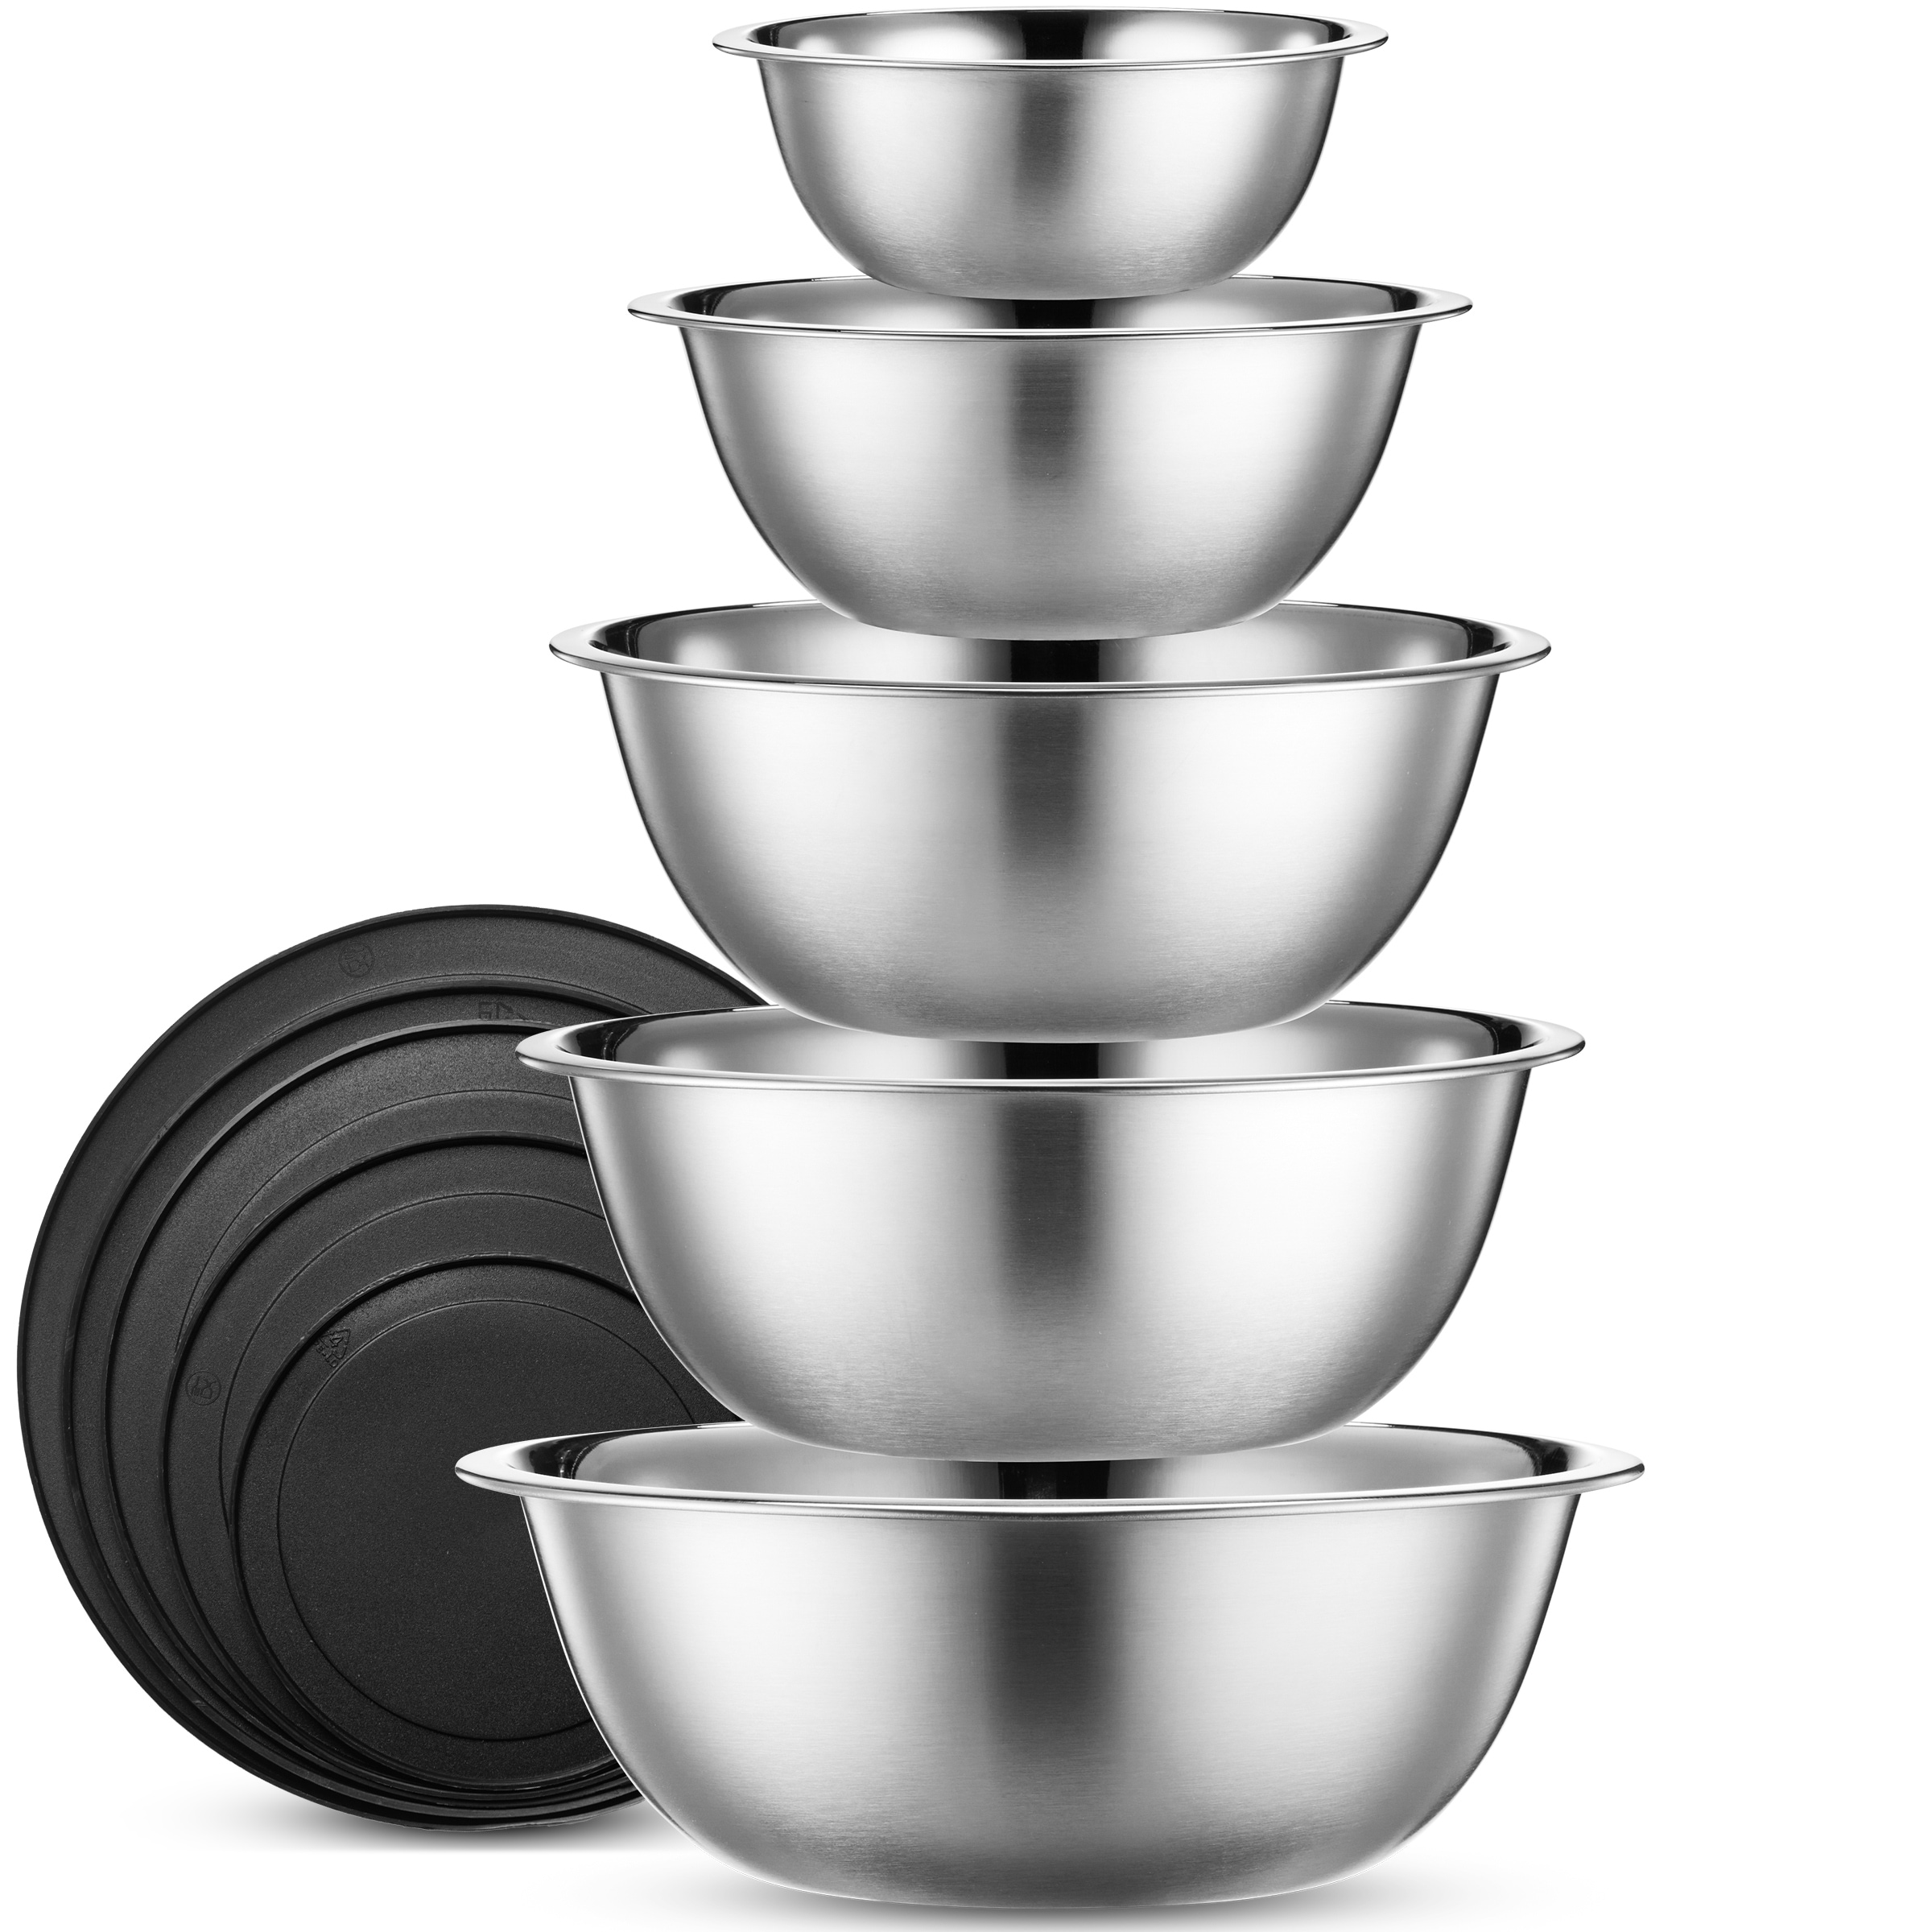 https://ak1.ostkcdn.com/images/products/is/images/direct/43cfc3213f03d6f4fbe68f99a8a0b7afae33a2f6/Heavy-Duty-Meal-Prep-Stainless-Steel-Mixing-Bowls-Set-with-Lids.jpg